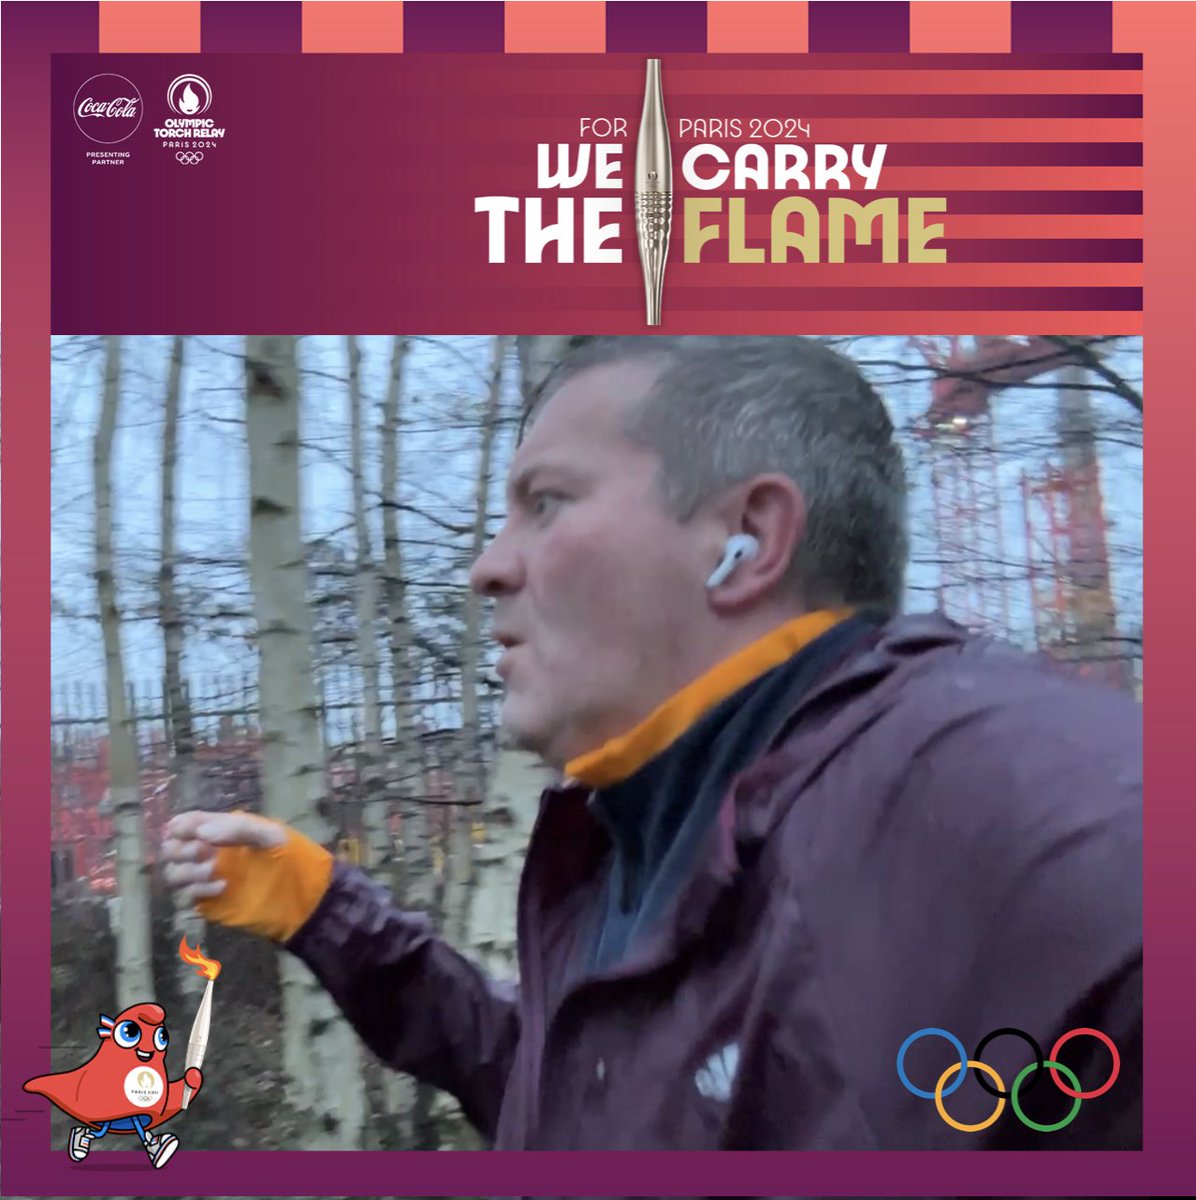 I'm really proud to announce that I'll be part of the @Paris2024 #Olympics2024 Torch Relay. See you on the beautiful French roads🔥 #WeCarryTheFlame #NousPortonsLaFlamme @CocaCola @CocaCola_GB  @GetSetCommunity @parkrunUK @RUFC_CT @TeamGB @Olympics @stbedes_roth Such an honour!